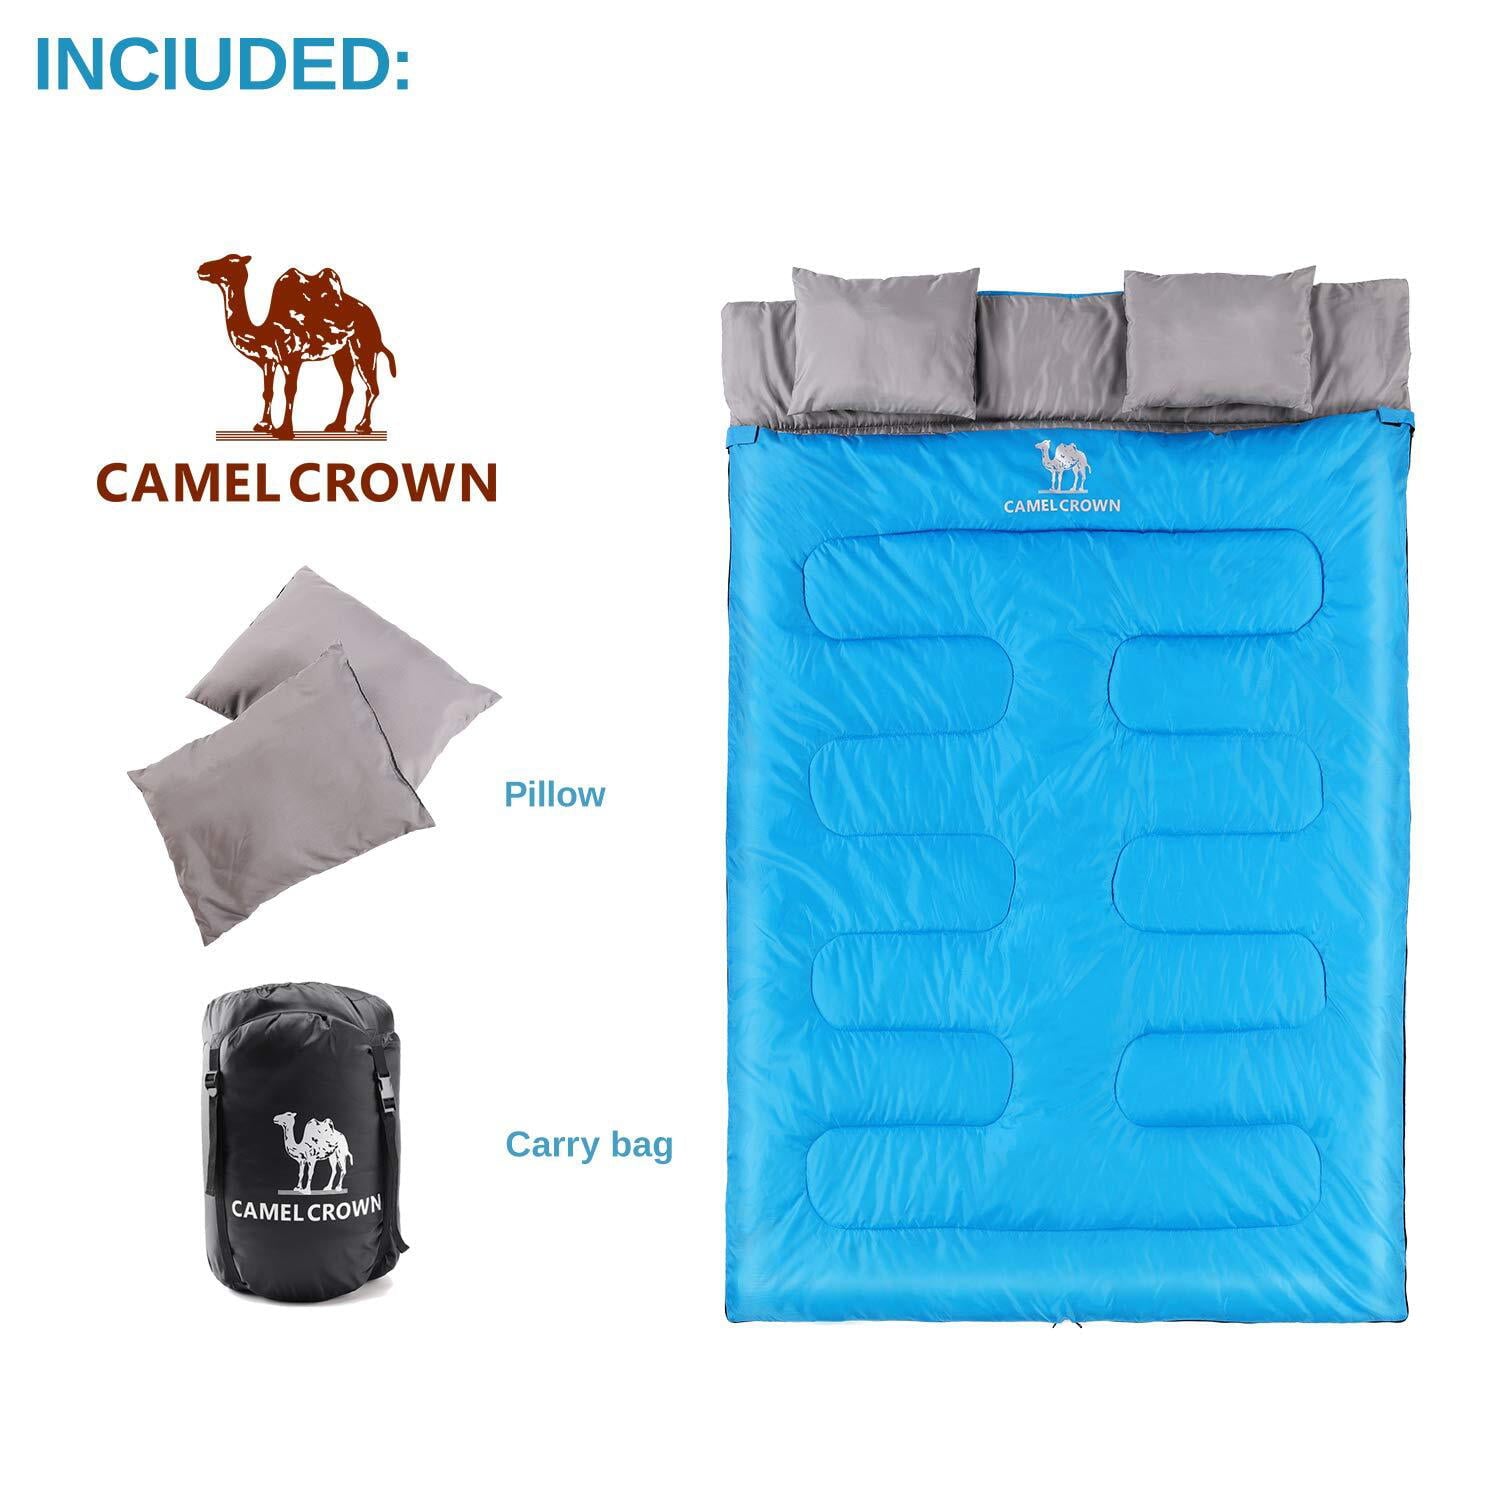 CAMEL CROWN Double Sleeping Bag - 4 Seasons Warm Cold Weather, Portable, Backpacking Hiking Camping Bag with Pillow for Camping & Adventures